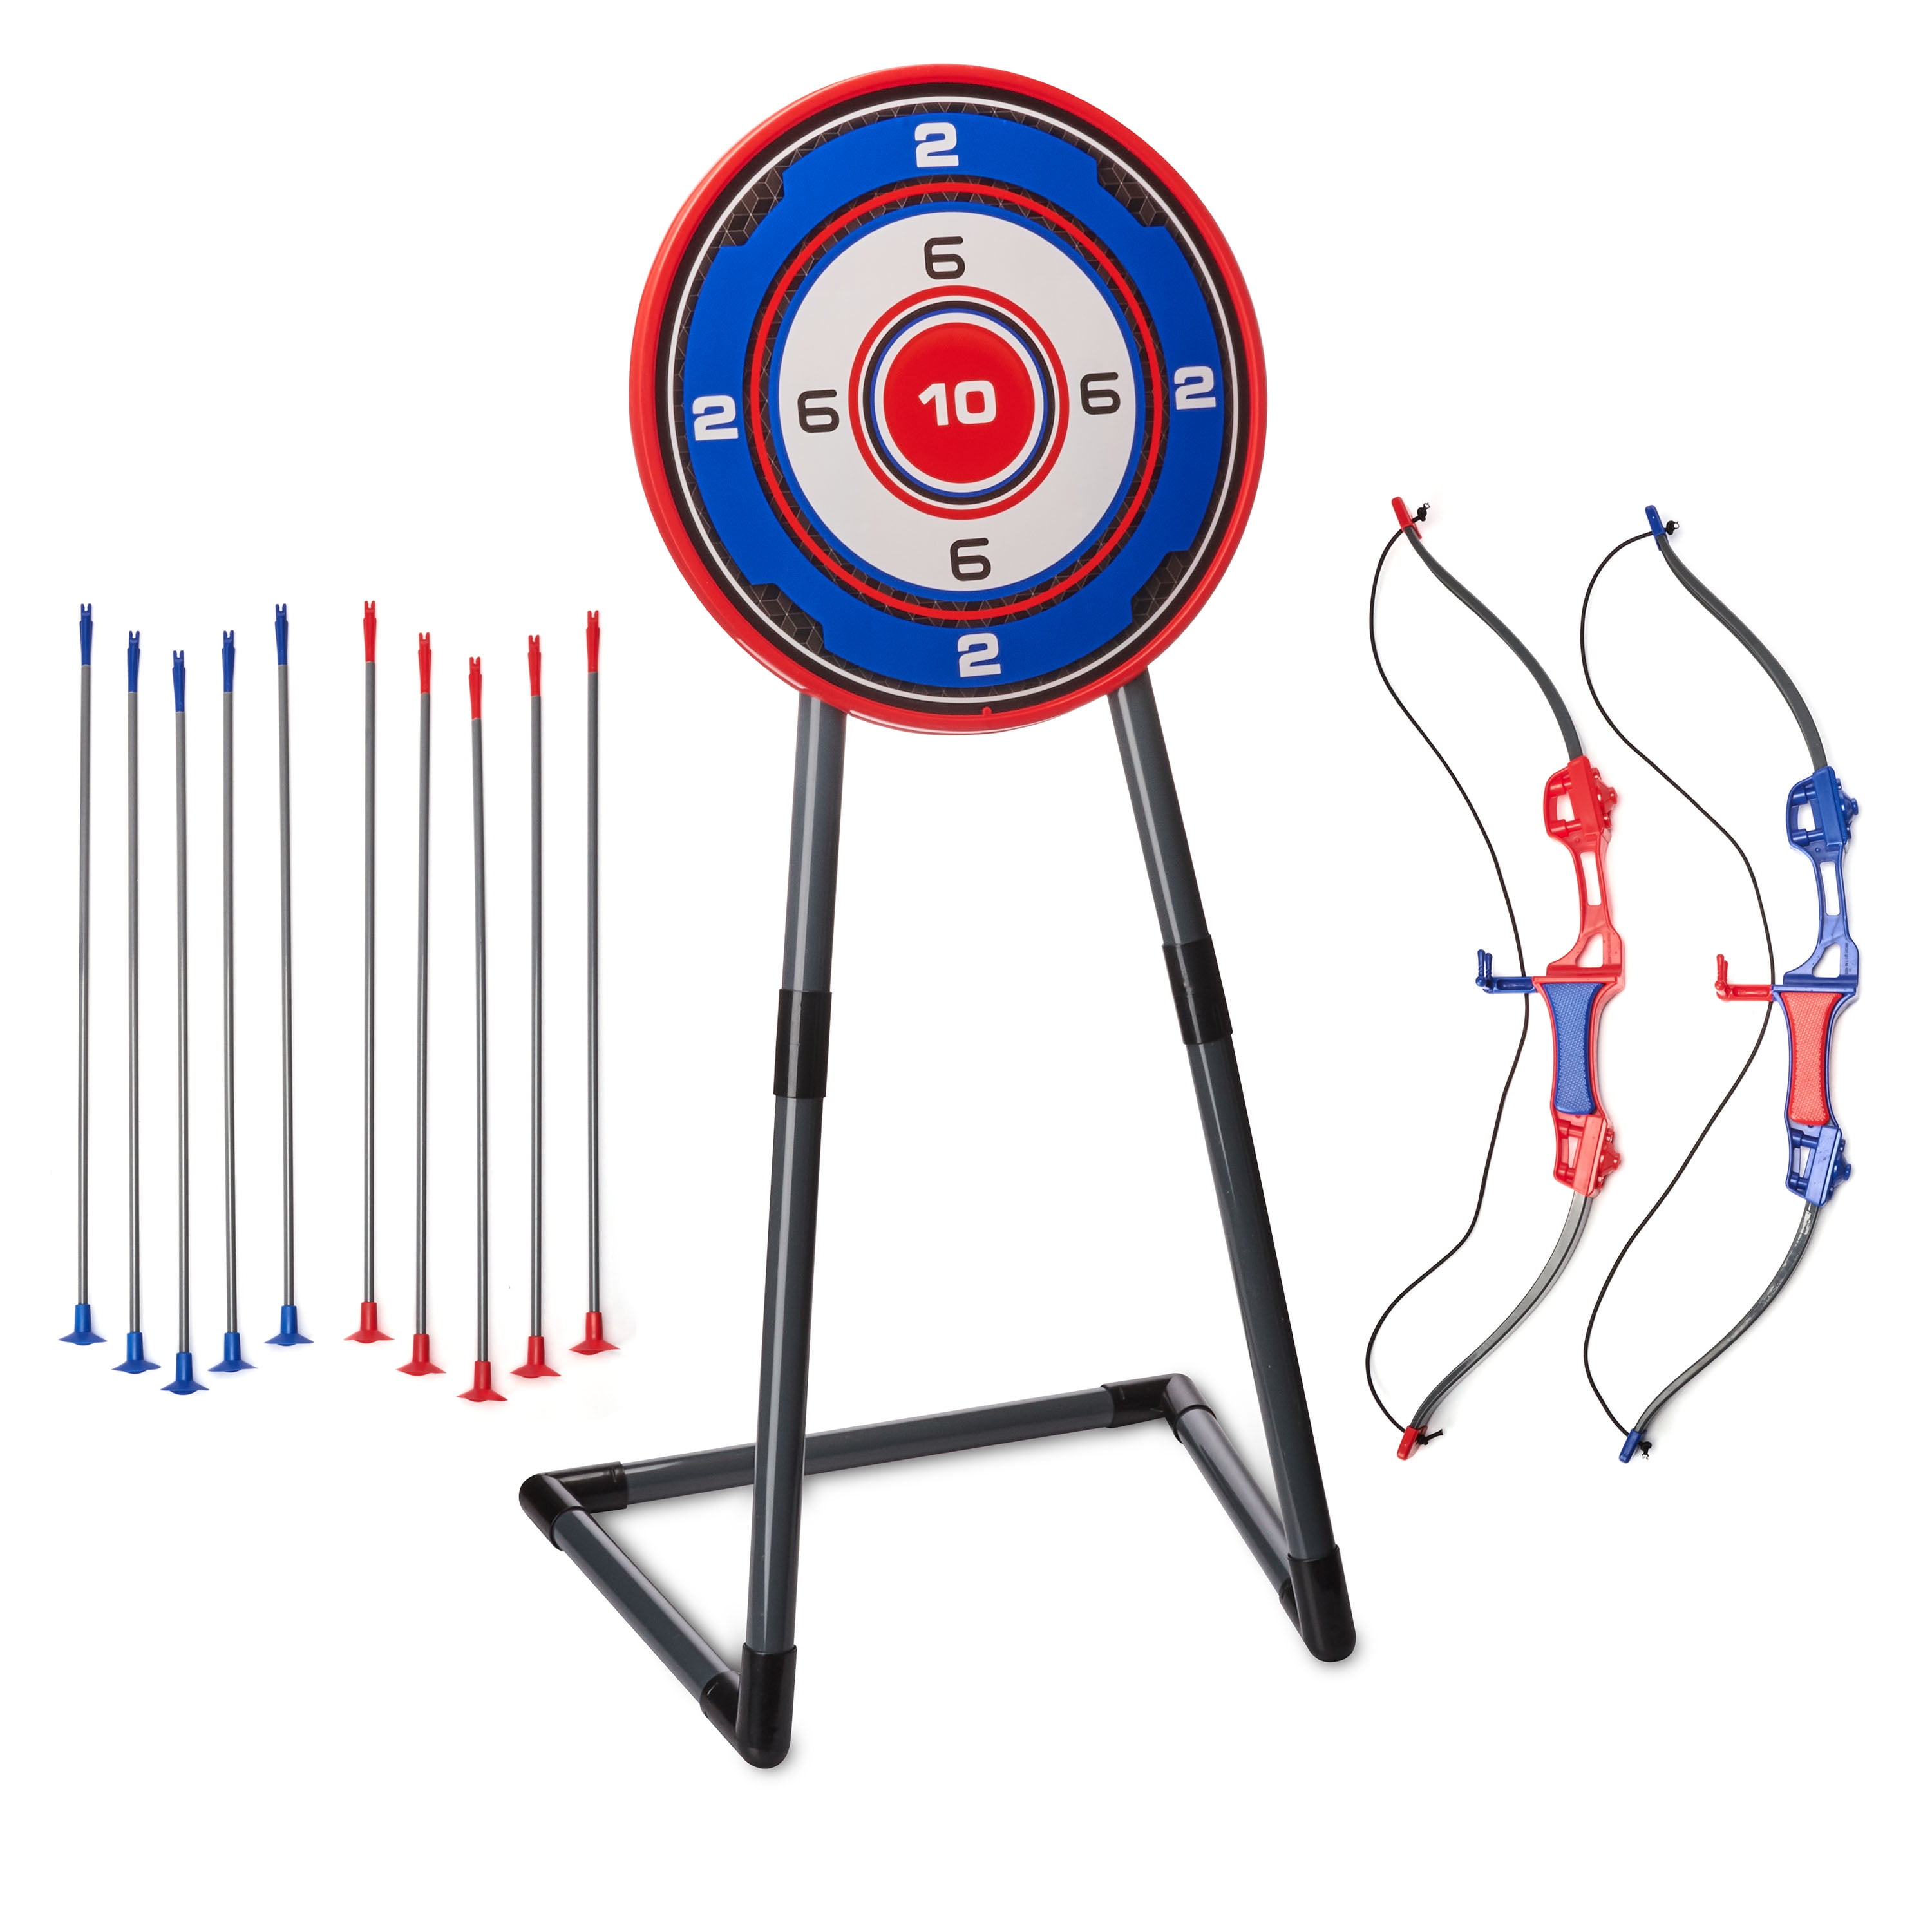 Sohapy Funny Bow and Arrow Sets Kids Toy Archery Set For Target Outdoor Garden Fun Game Sport & Party Favors 